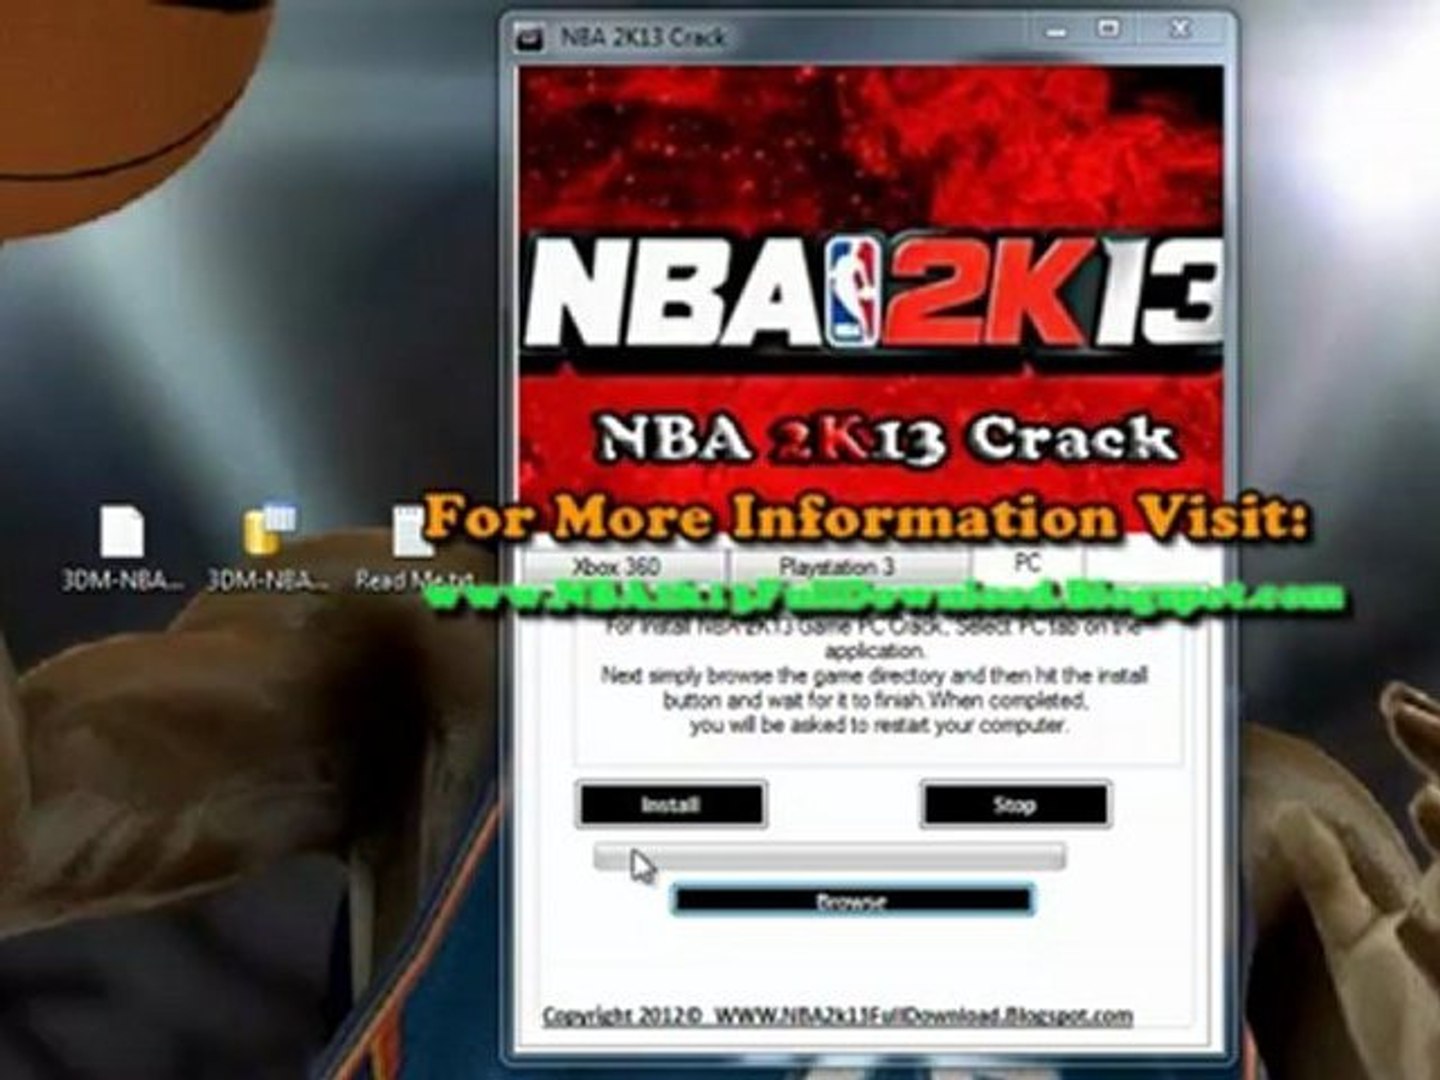 Nba 2k12 download for pc no steam torrent free